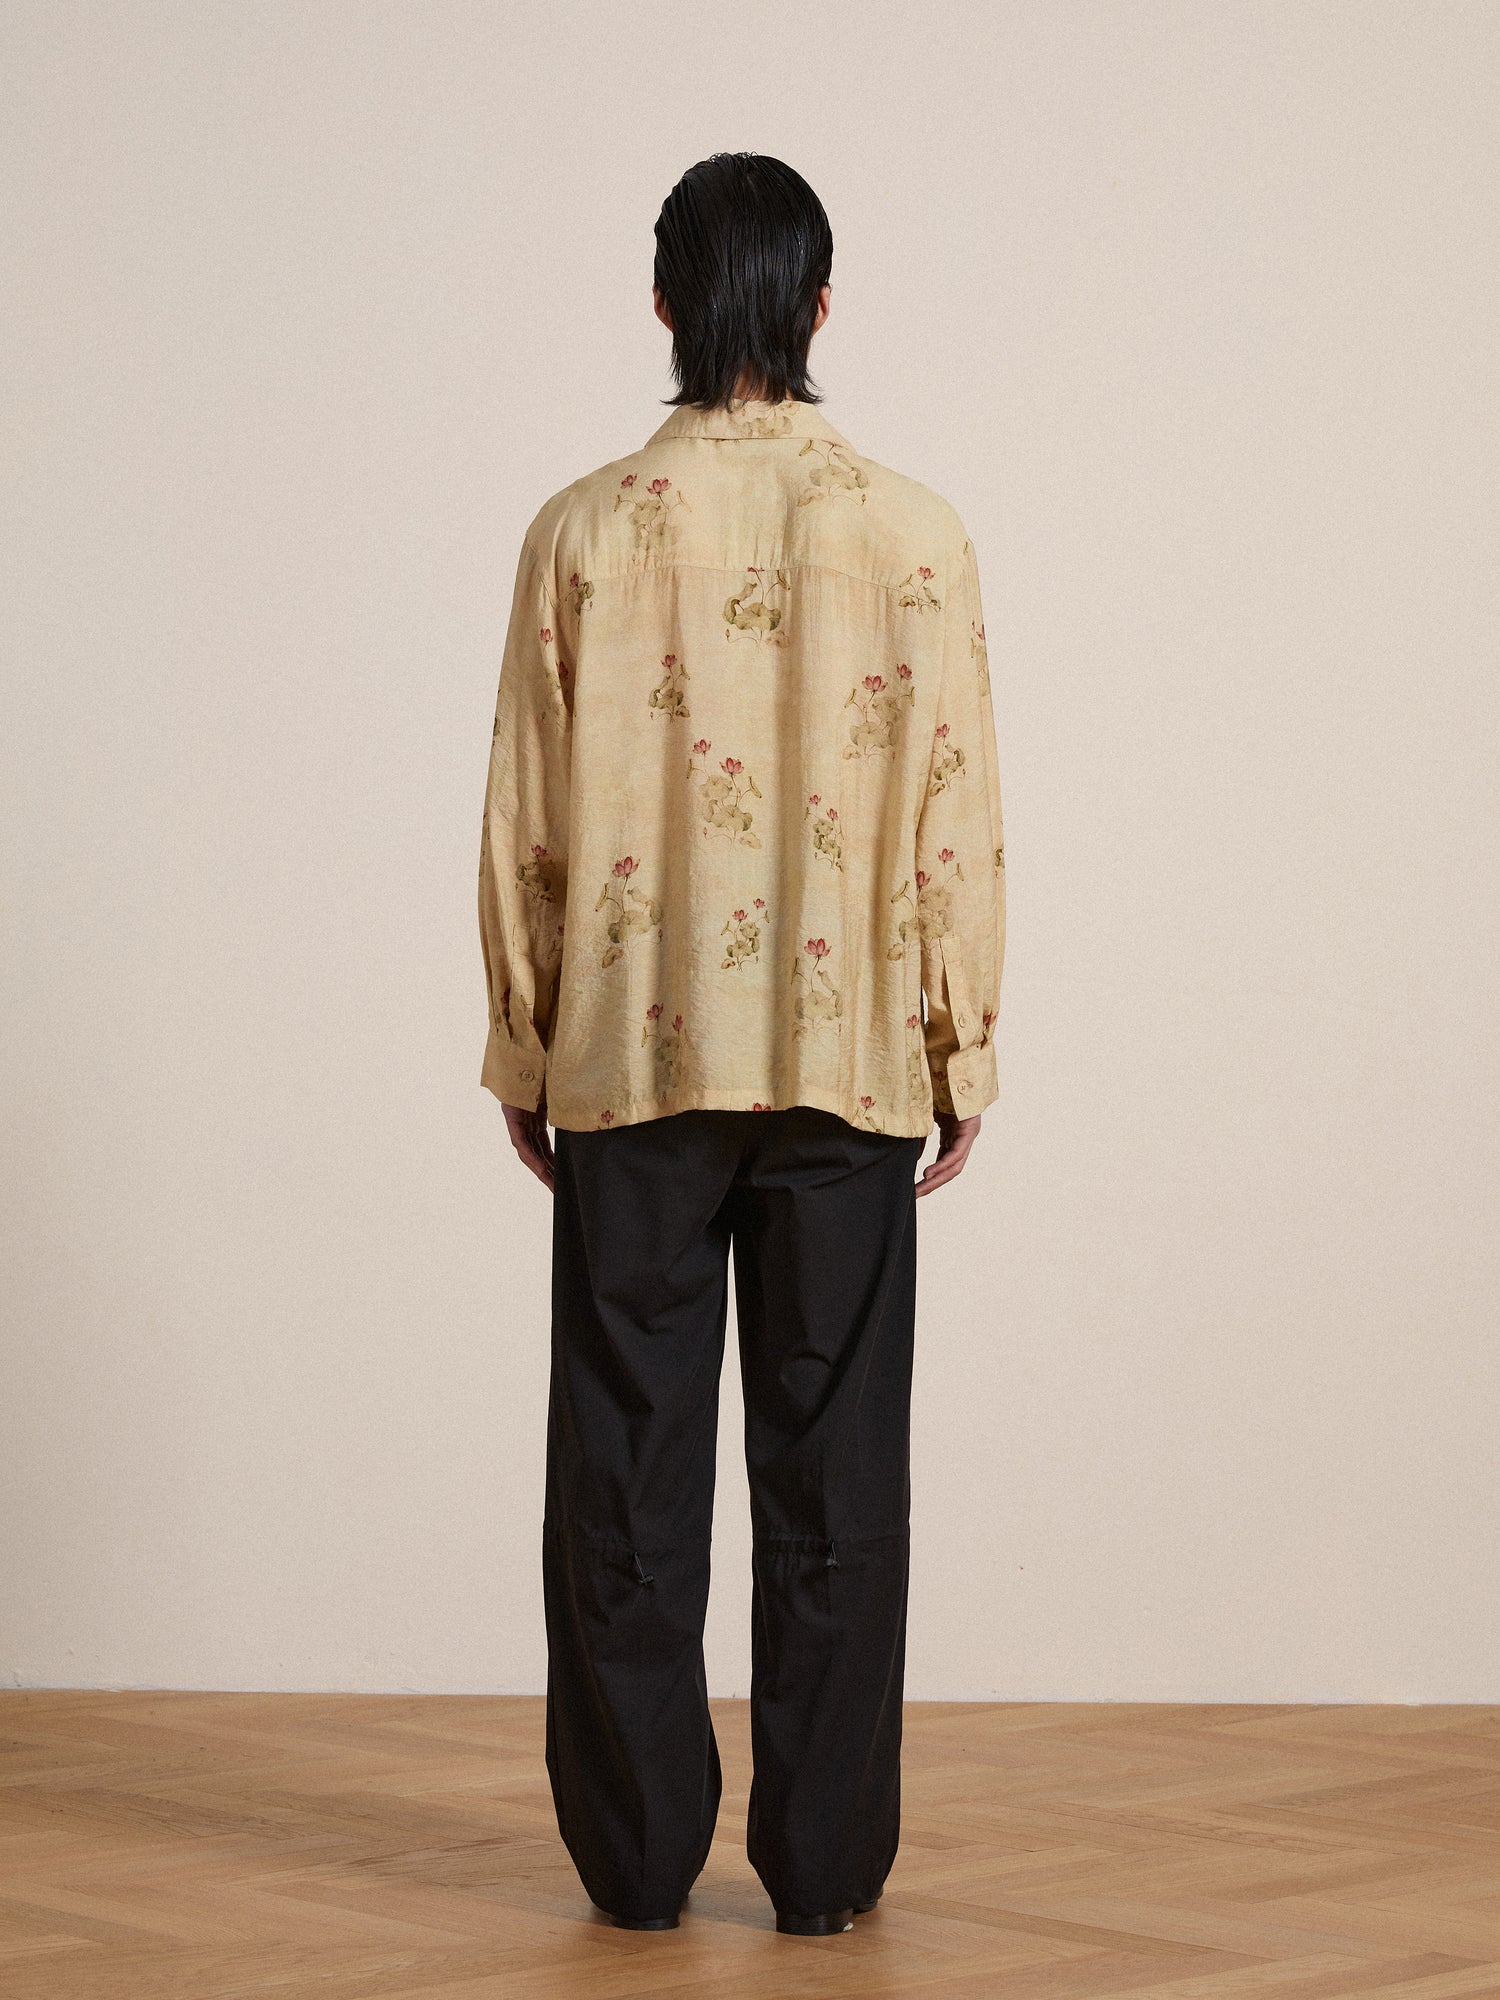 A person viewed from behind, wearing a beige floral shirt and black Found Tencel Pleated Pants, standing against a plain wall on a wooden floor.